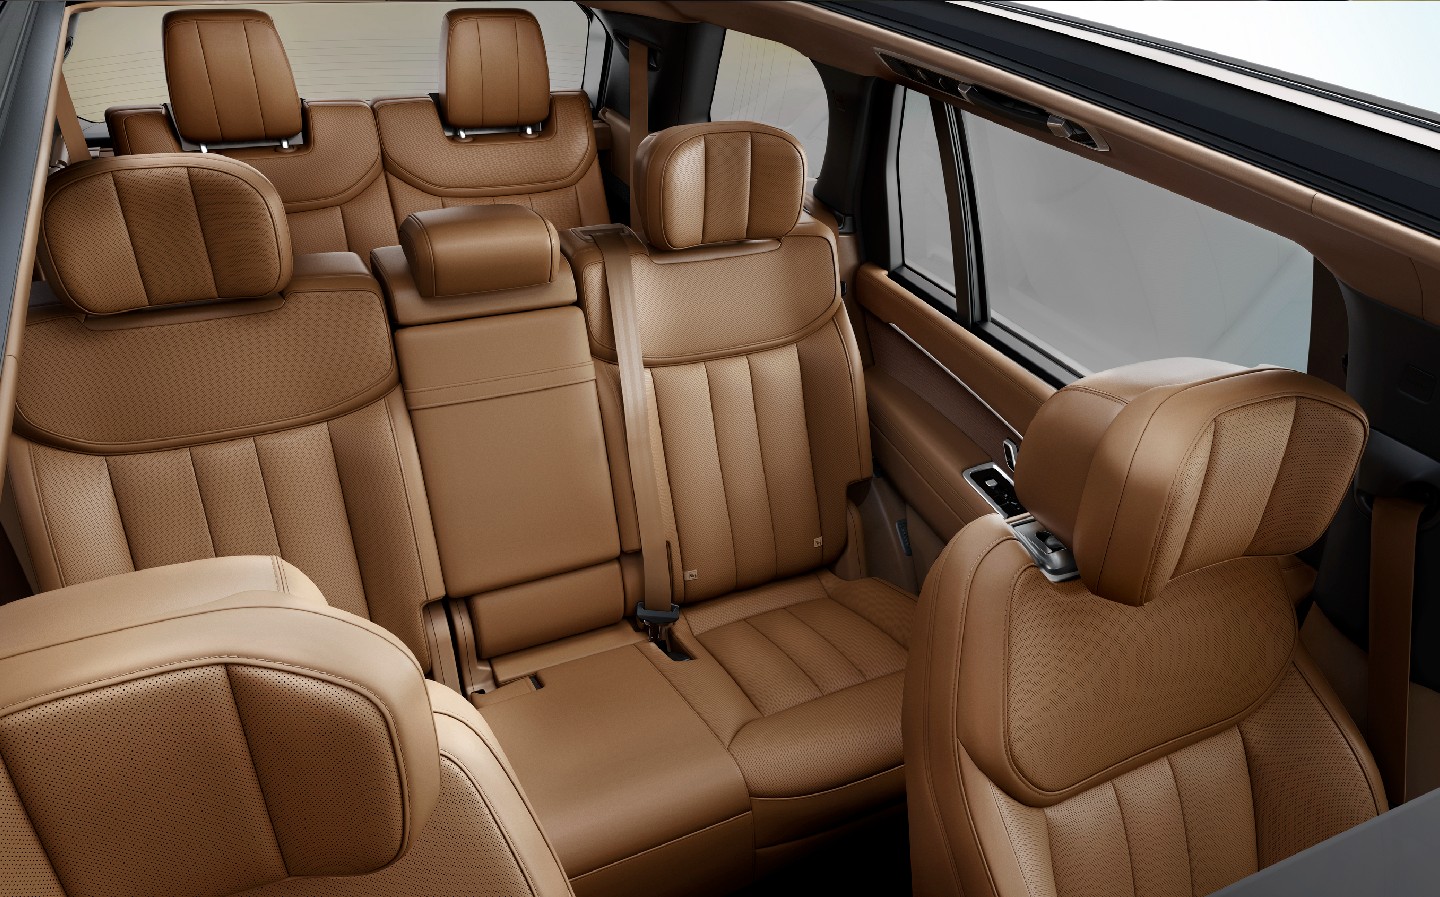 Seven seat interior: 2022 Range Rover review by Will Dron from Driving.co.uk at The Sunday Times